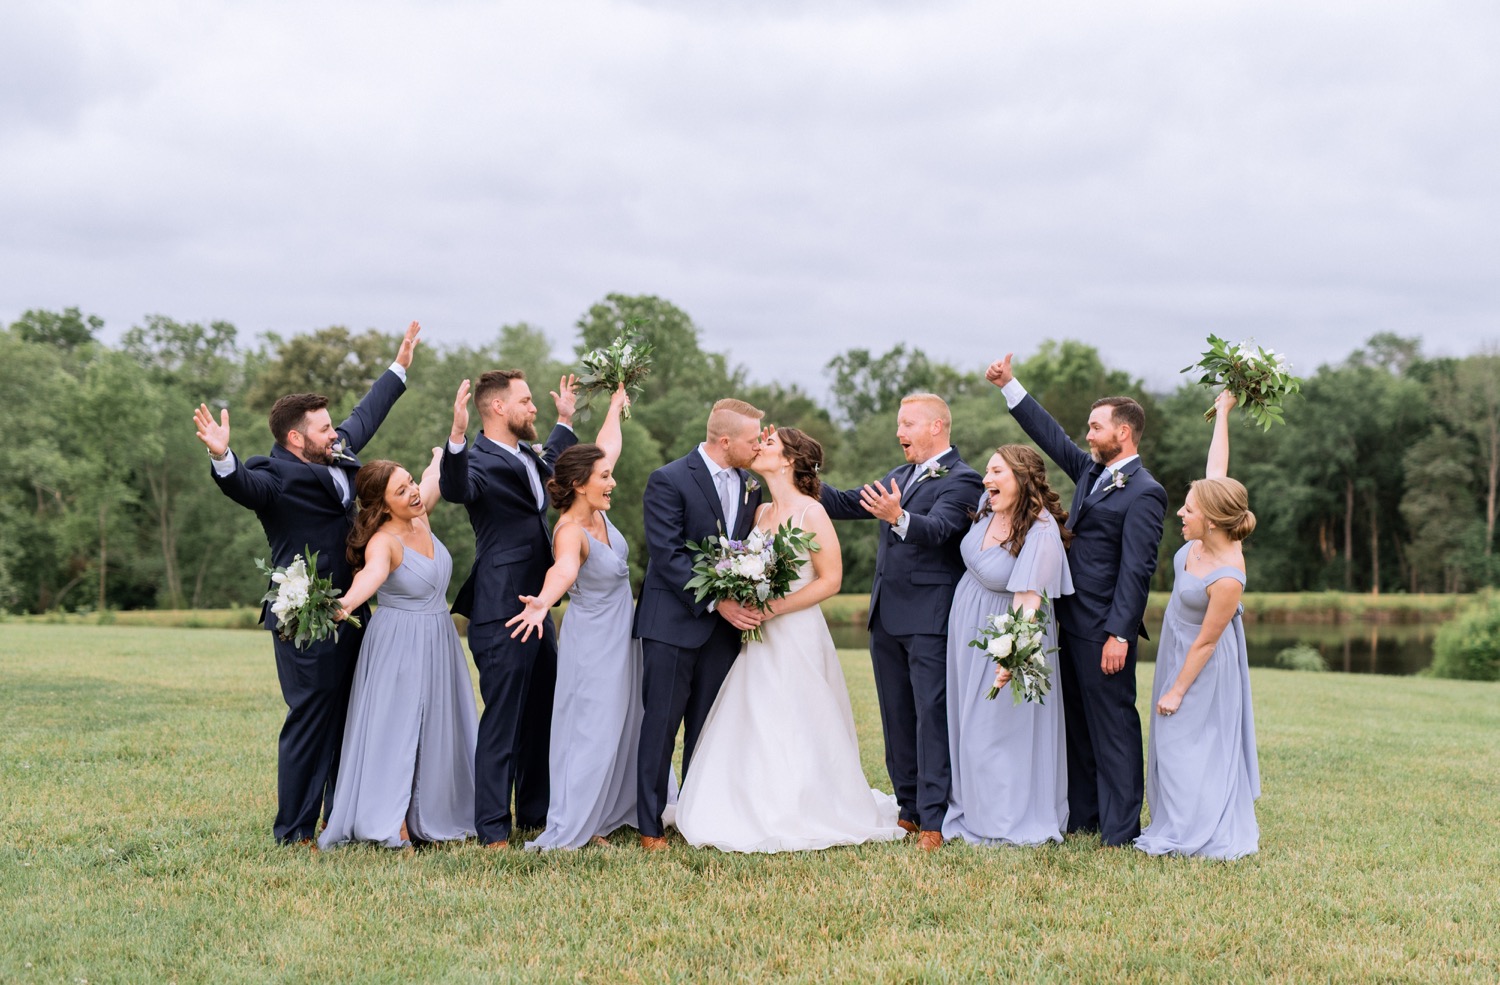 Entire wedding party before wedding ceremony in Charlottesville, VA